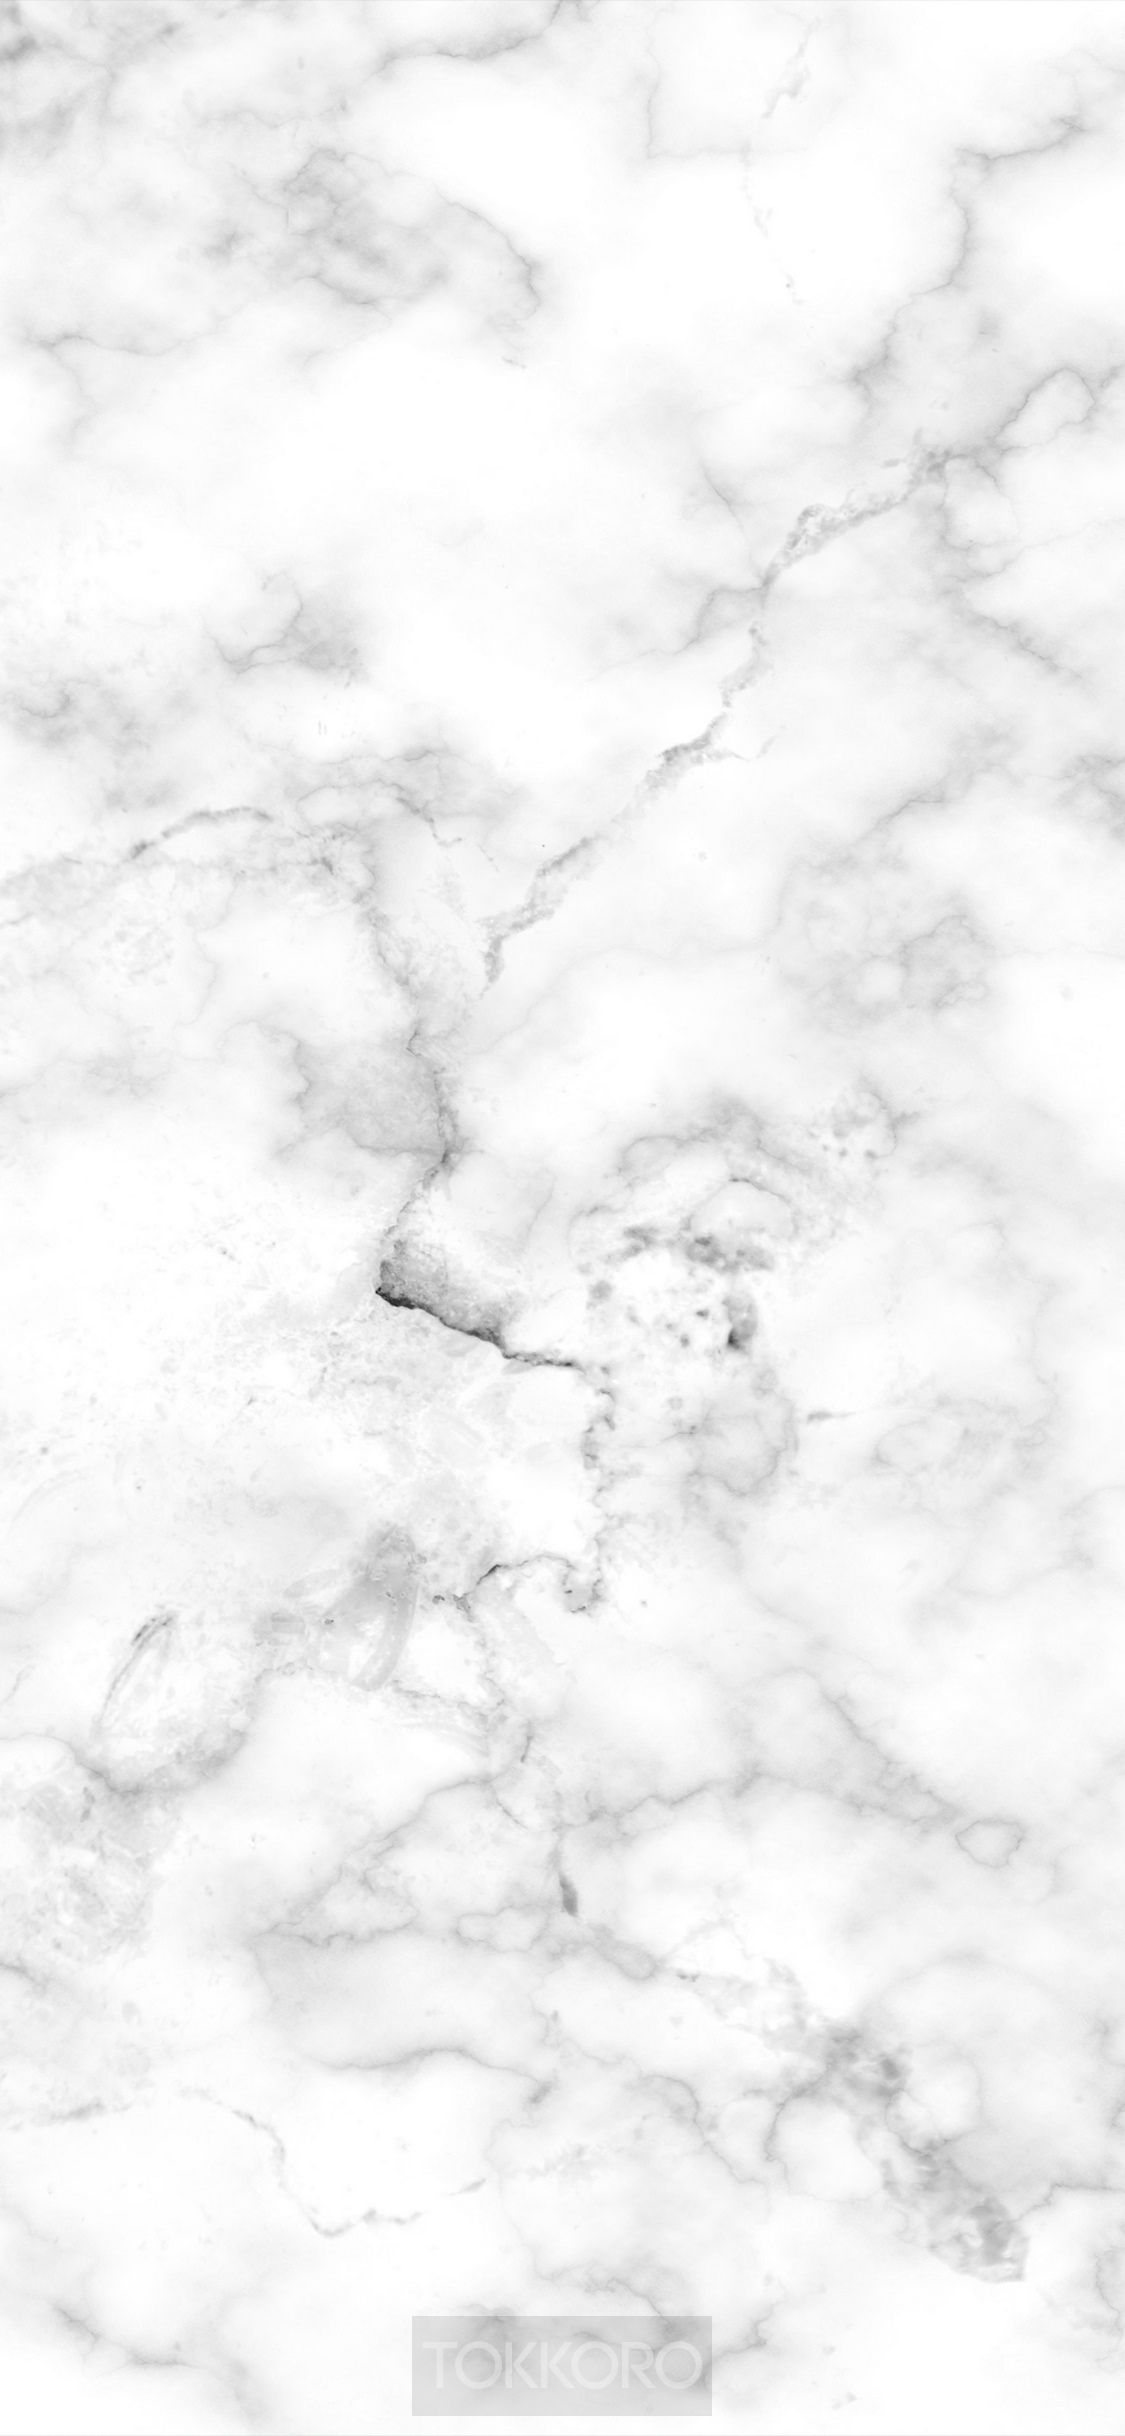 A white marble texture with some black lines - Marble